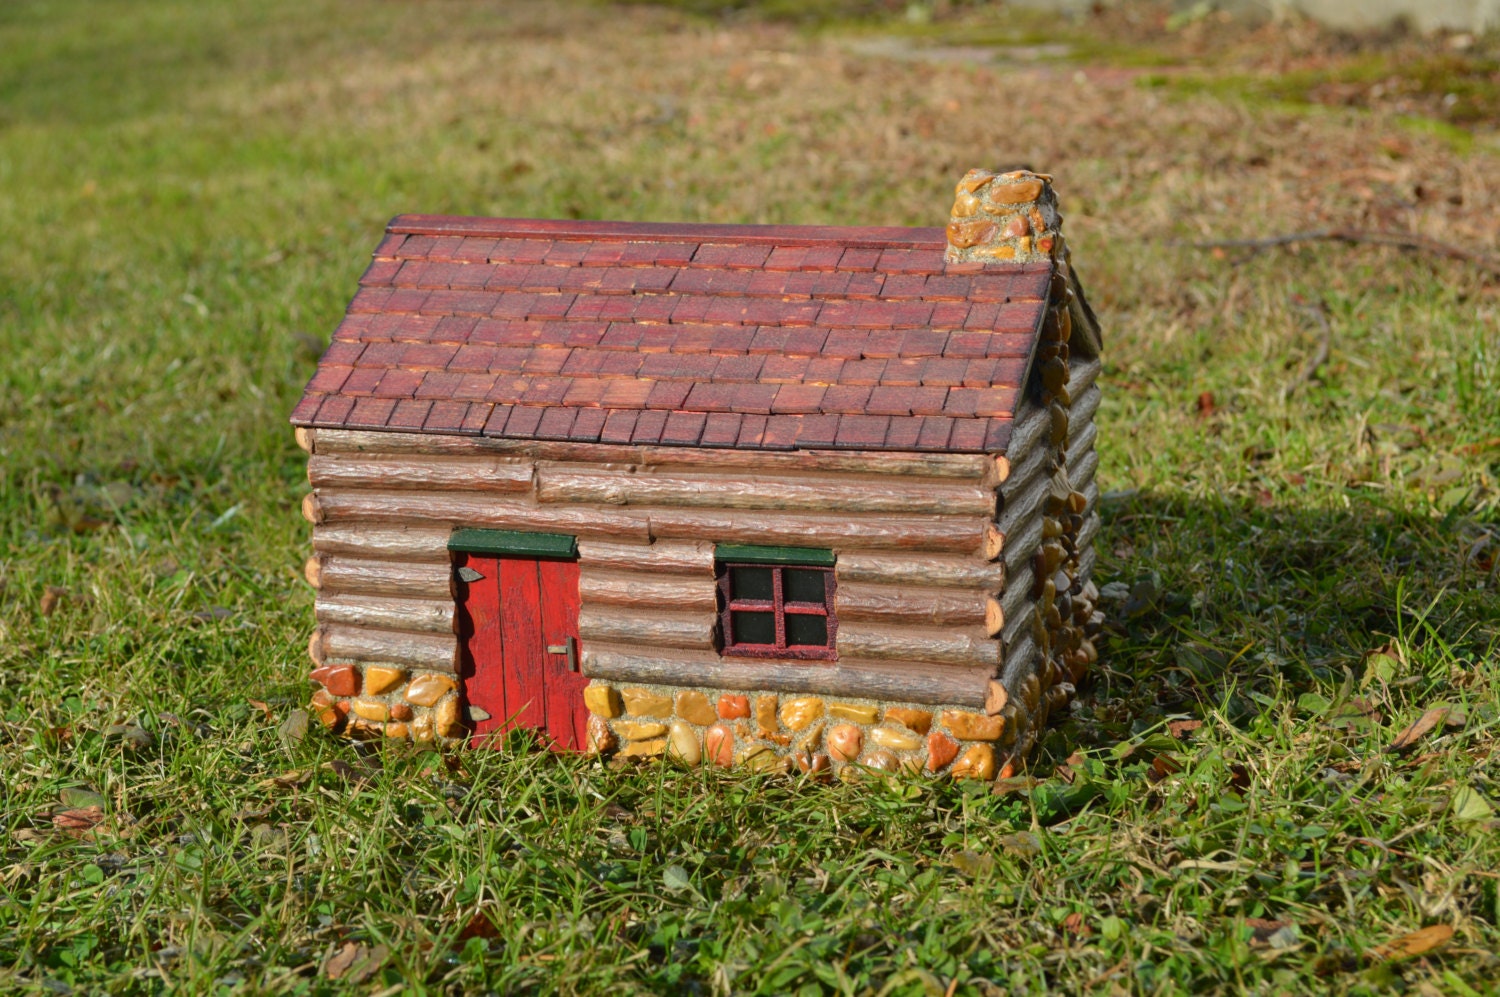 Miniature Log Cabin model Hand Made in Maine